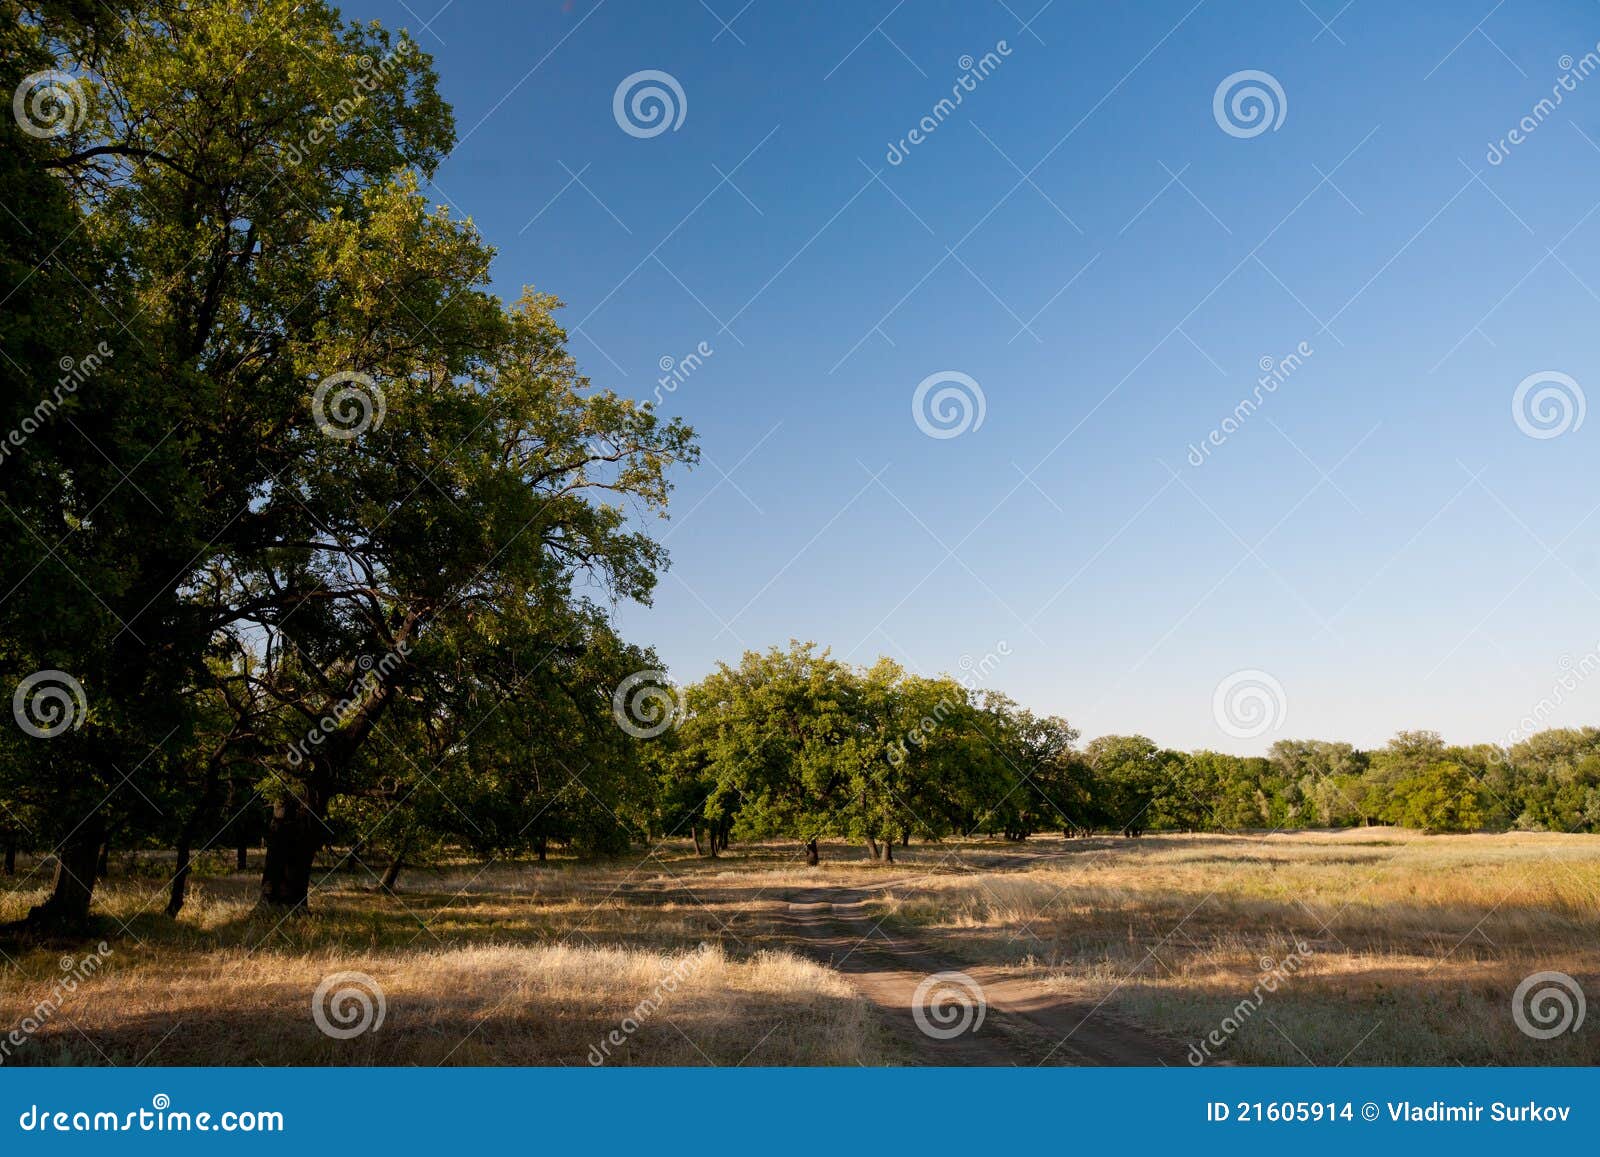 Sunny oaks stock photo. Image of foliage, branch, clouds - 21605914